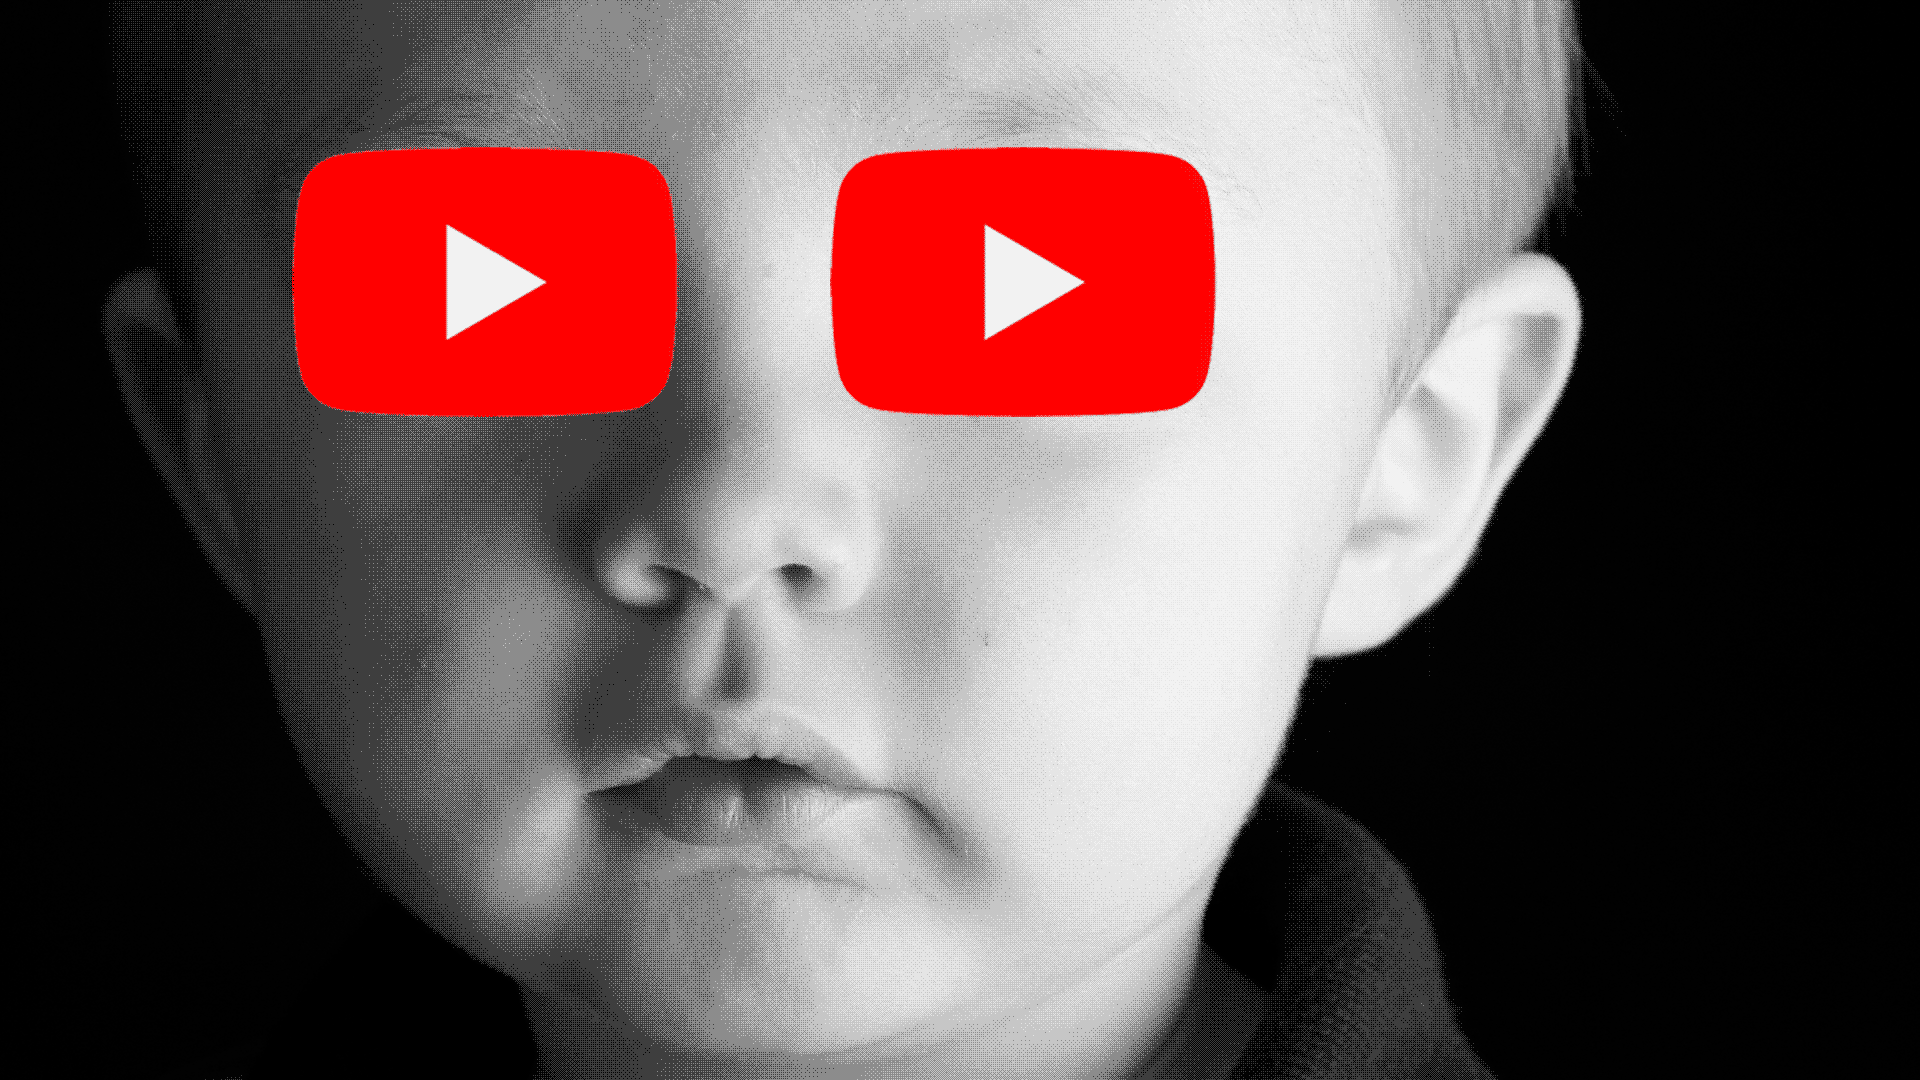 Animated illustration of a toddler's face with rotating YouTube "play" buttons for eyes